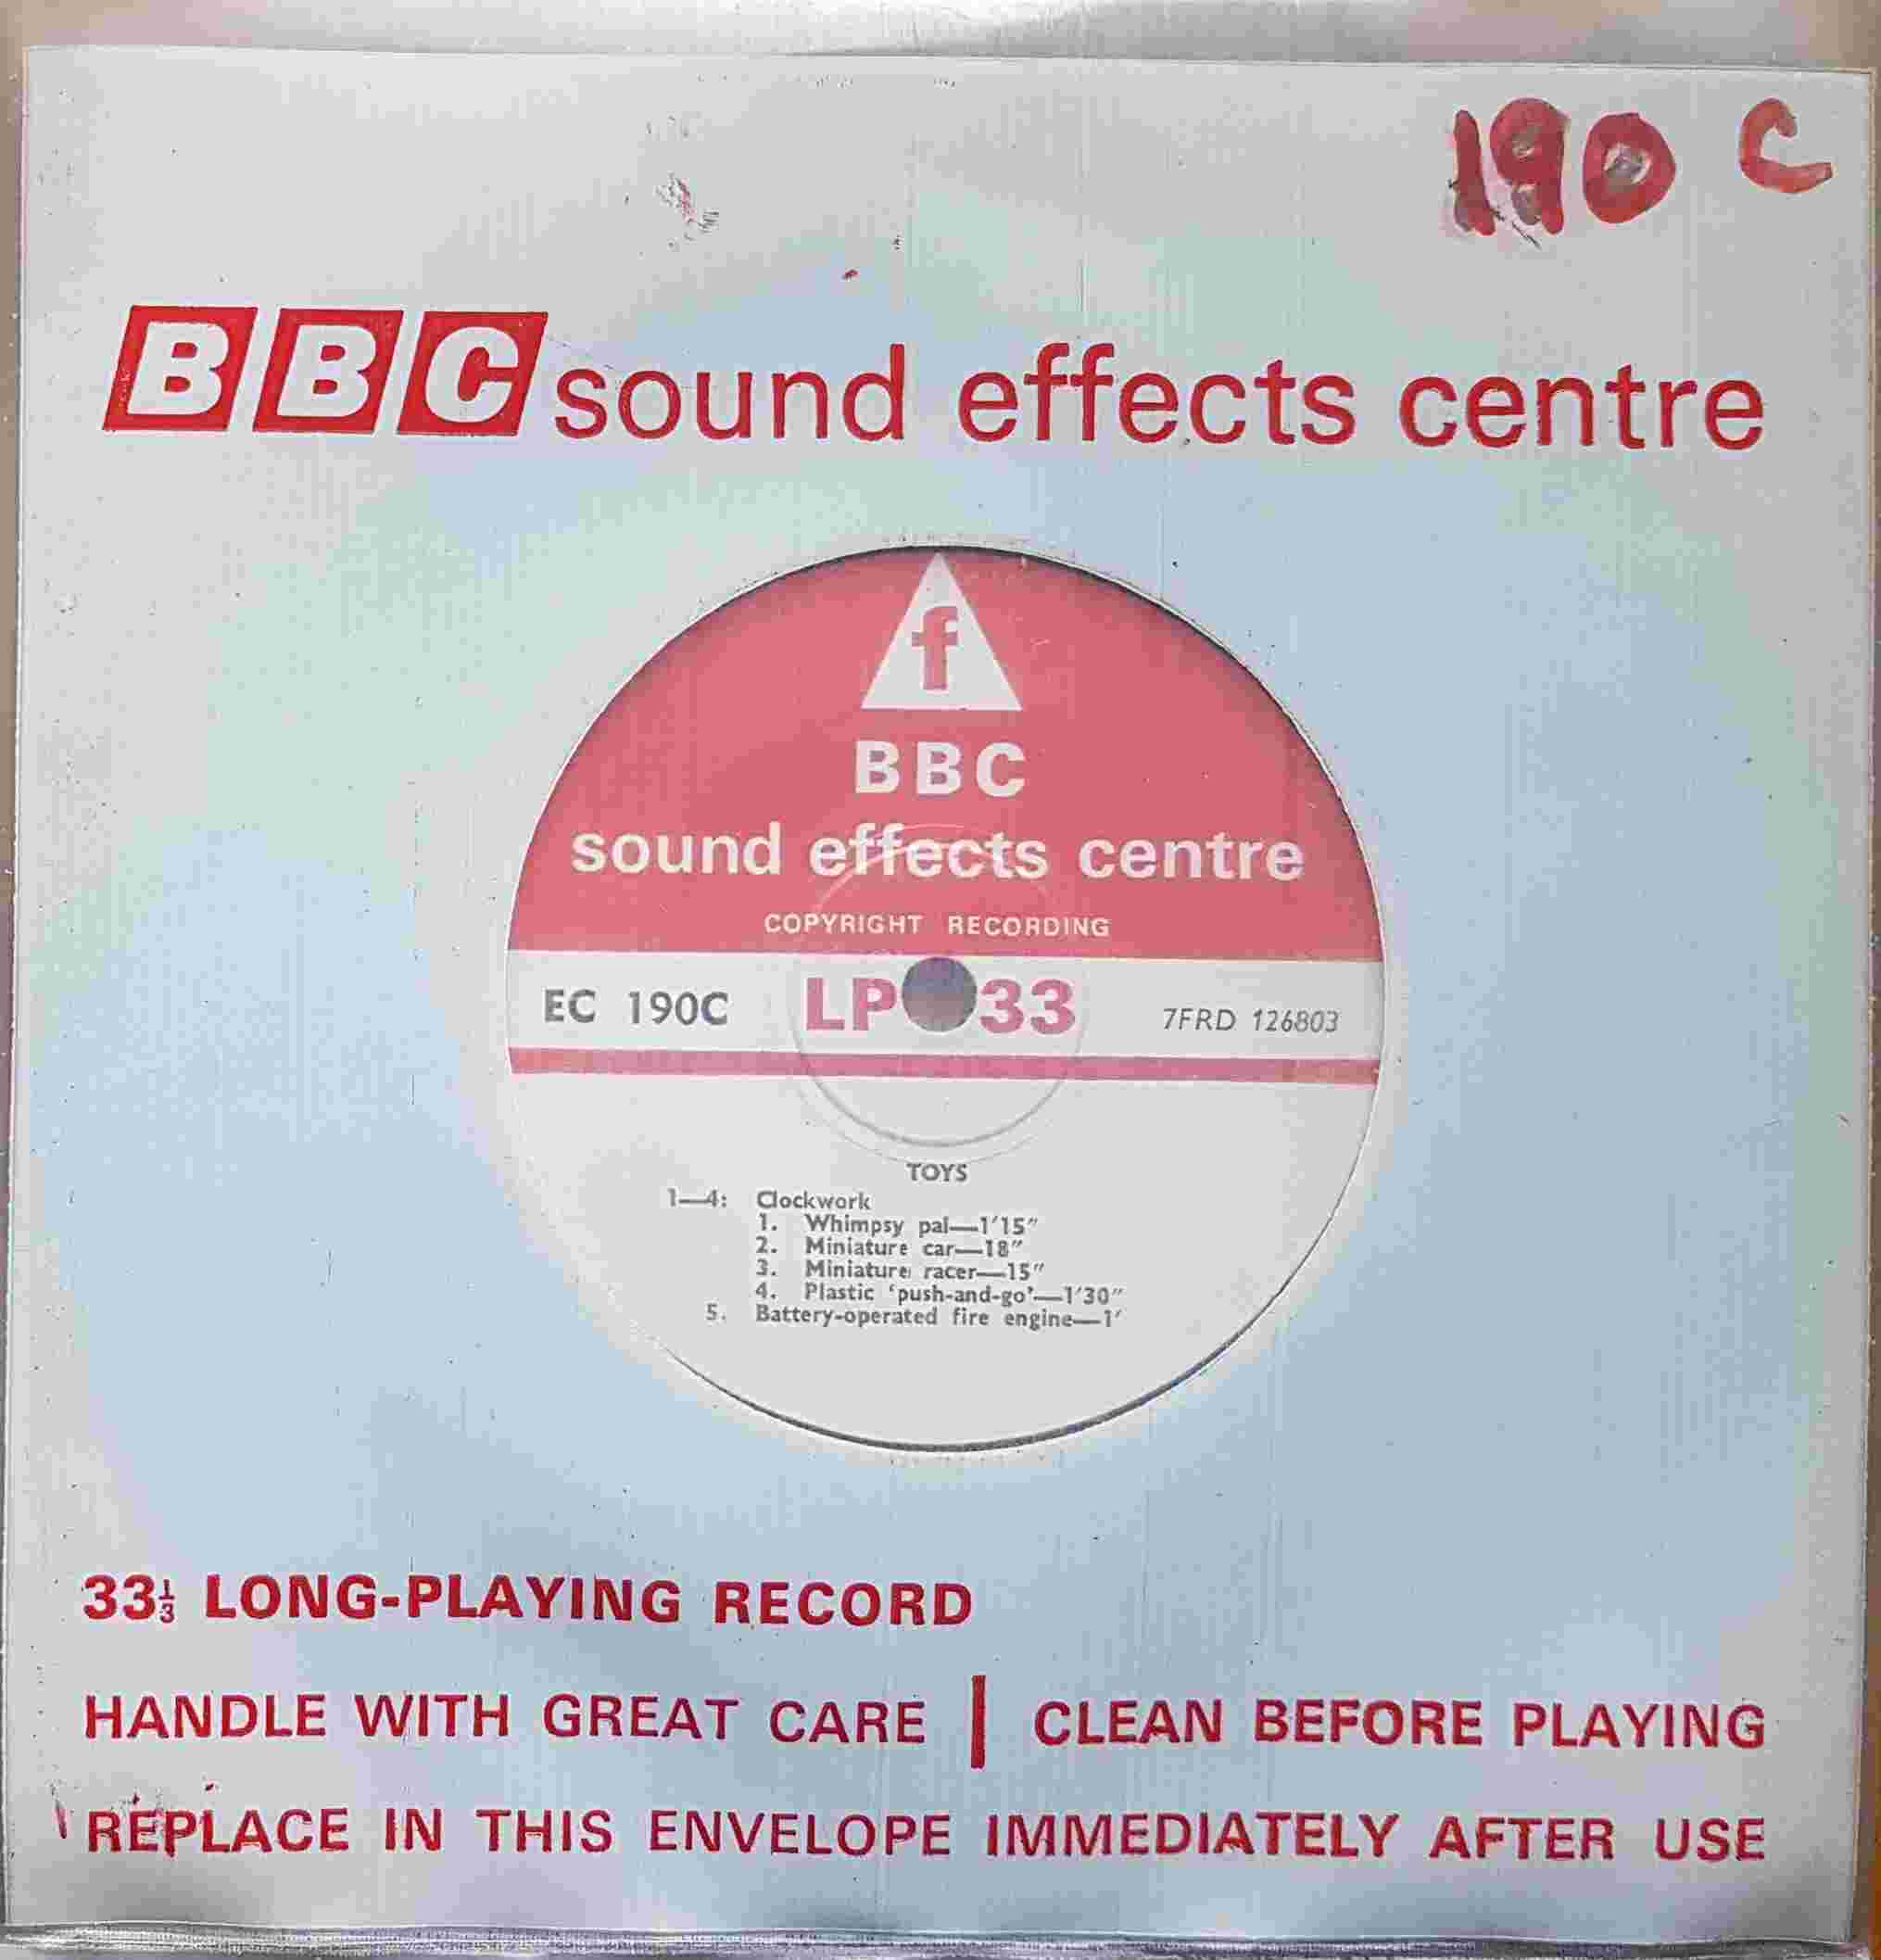 Picture of EC 190C Toys by artist Not registered from the BBC singles - Records and Tapes library